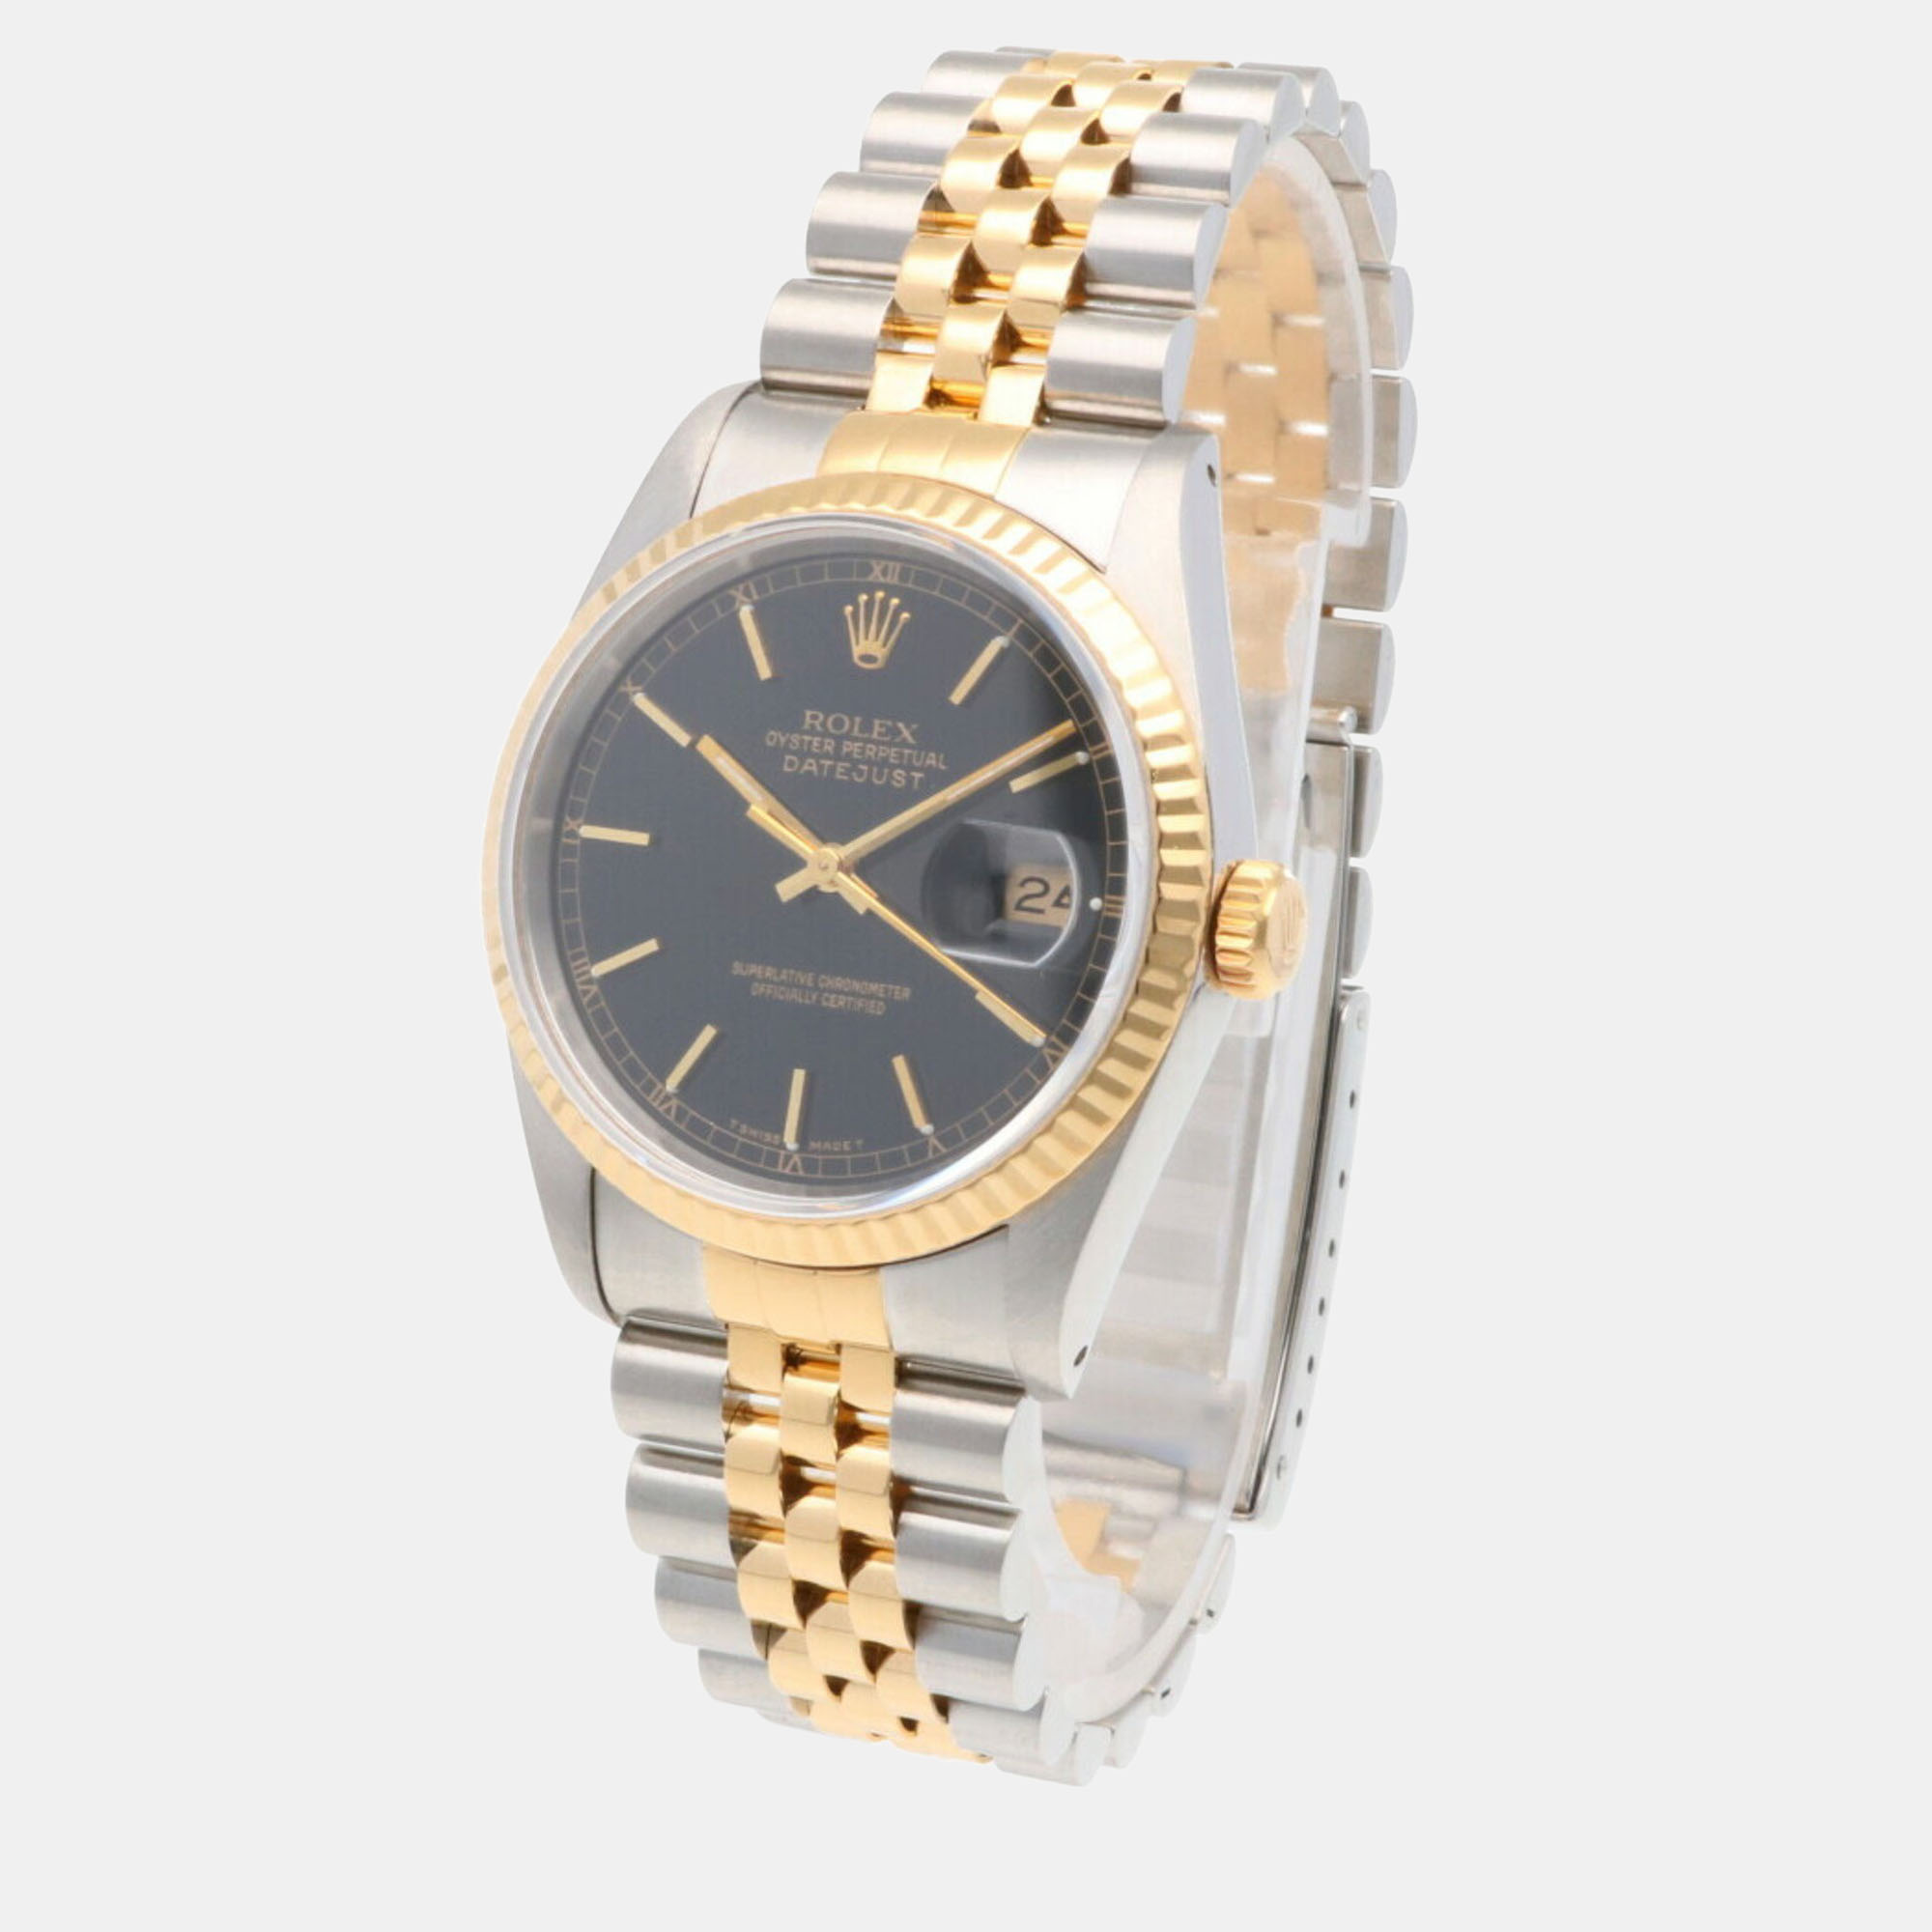 Rolex Black 18k Yellow Gold And Stainless Steel Datejust 16233 Automatic Men's Wristwatch 36 Mm